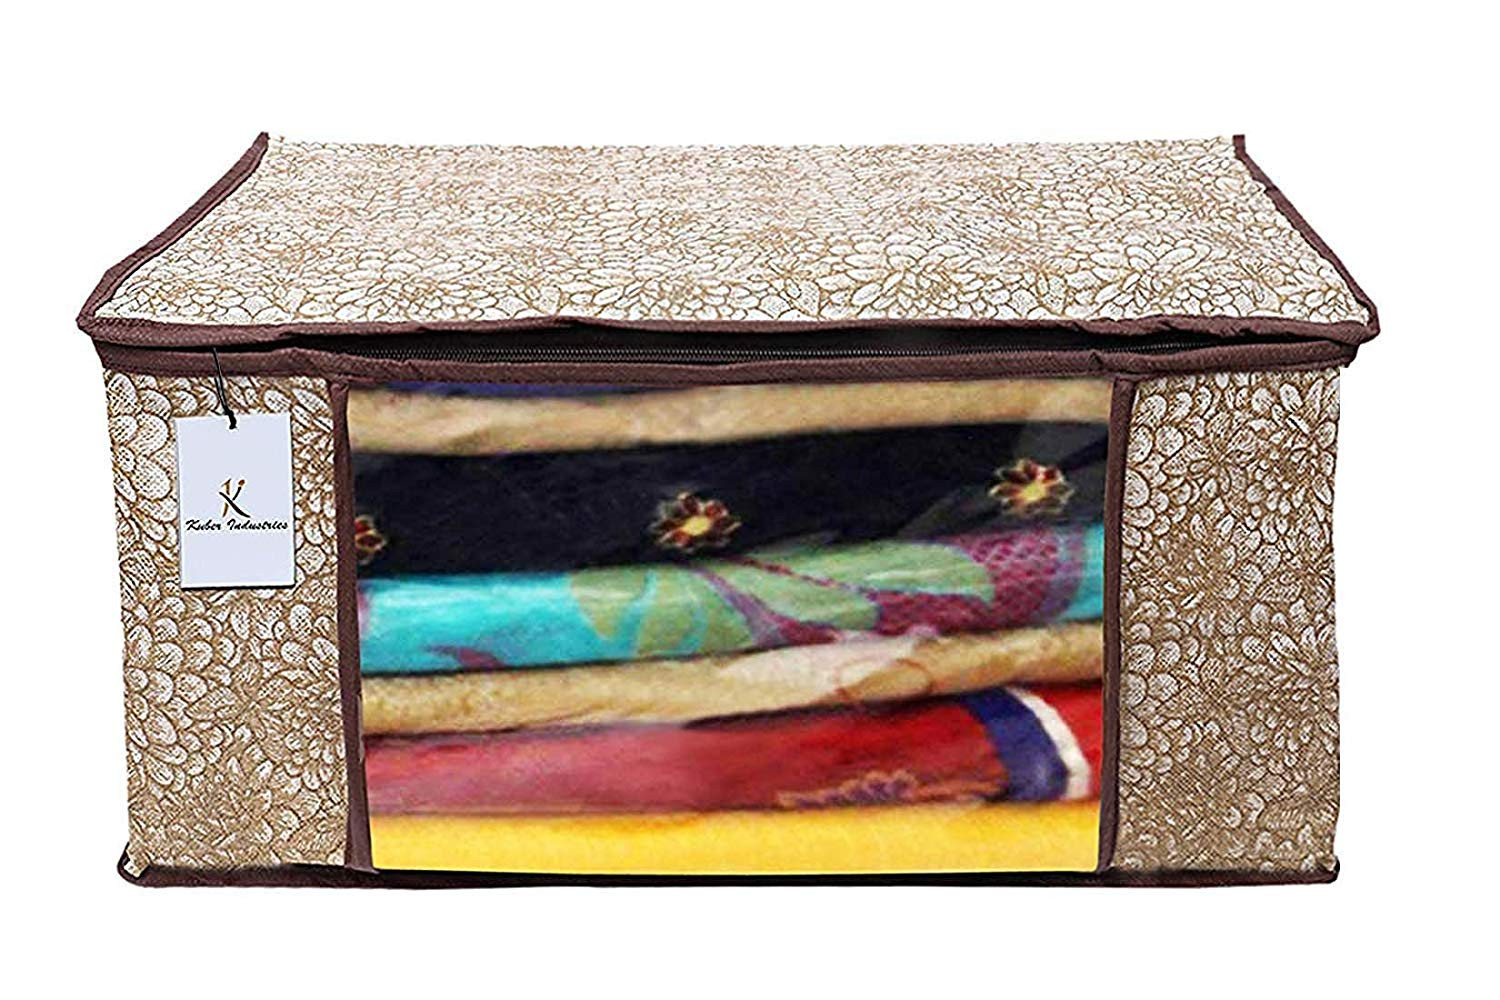 Kuber Industries Metalic Printed Non Woven Fabric Saree Cover Set with Transparent Window, Extra Large, Golden Brown & Red -CTKTC40773